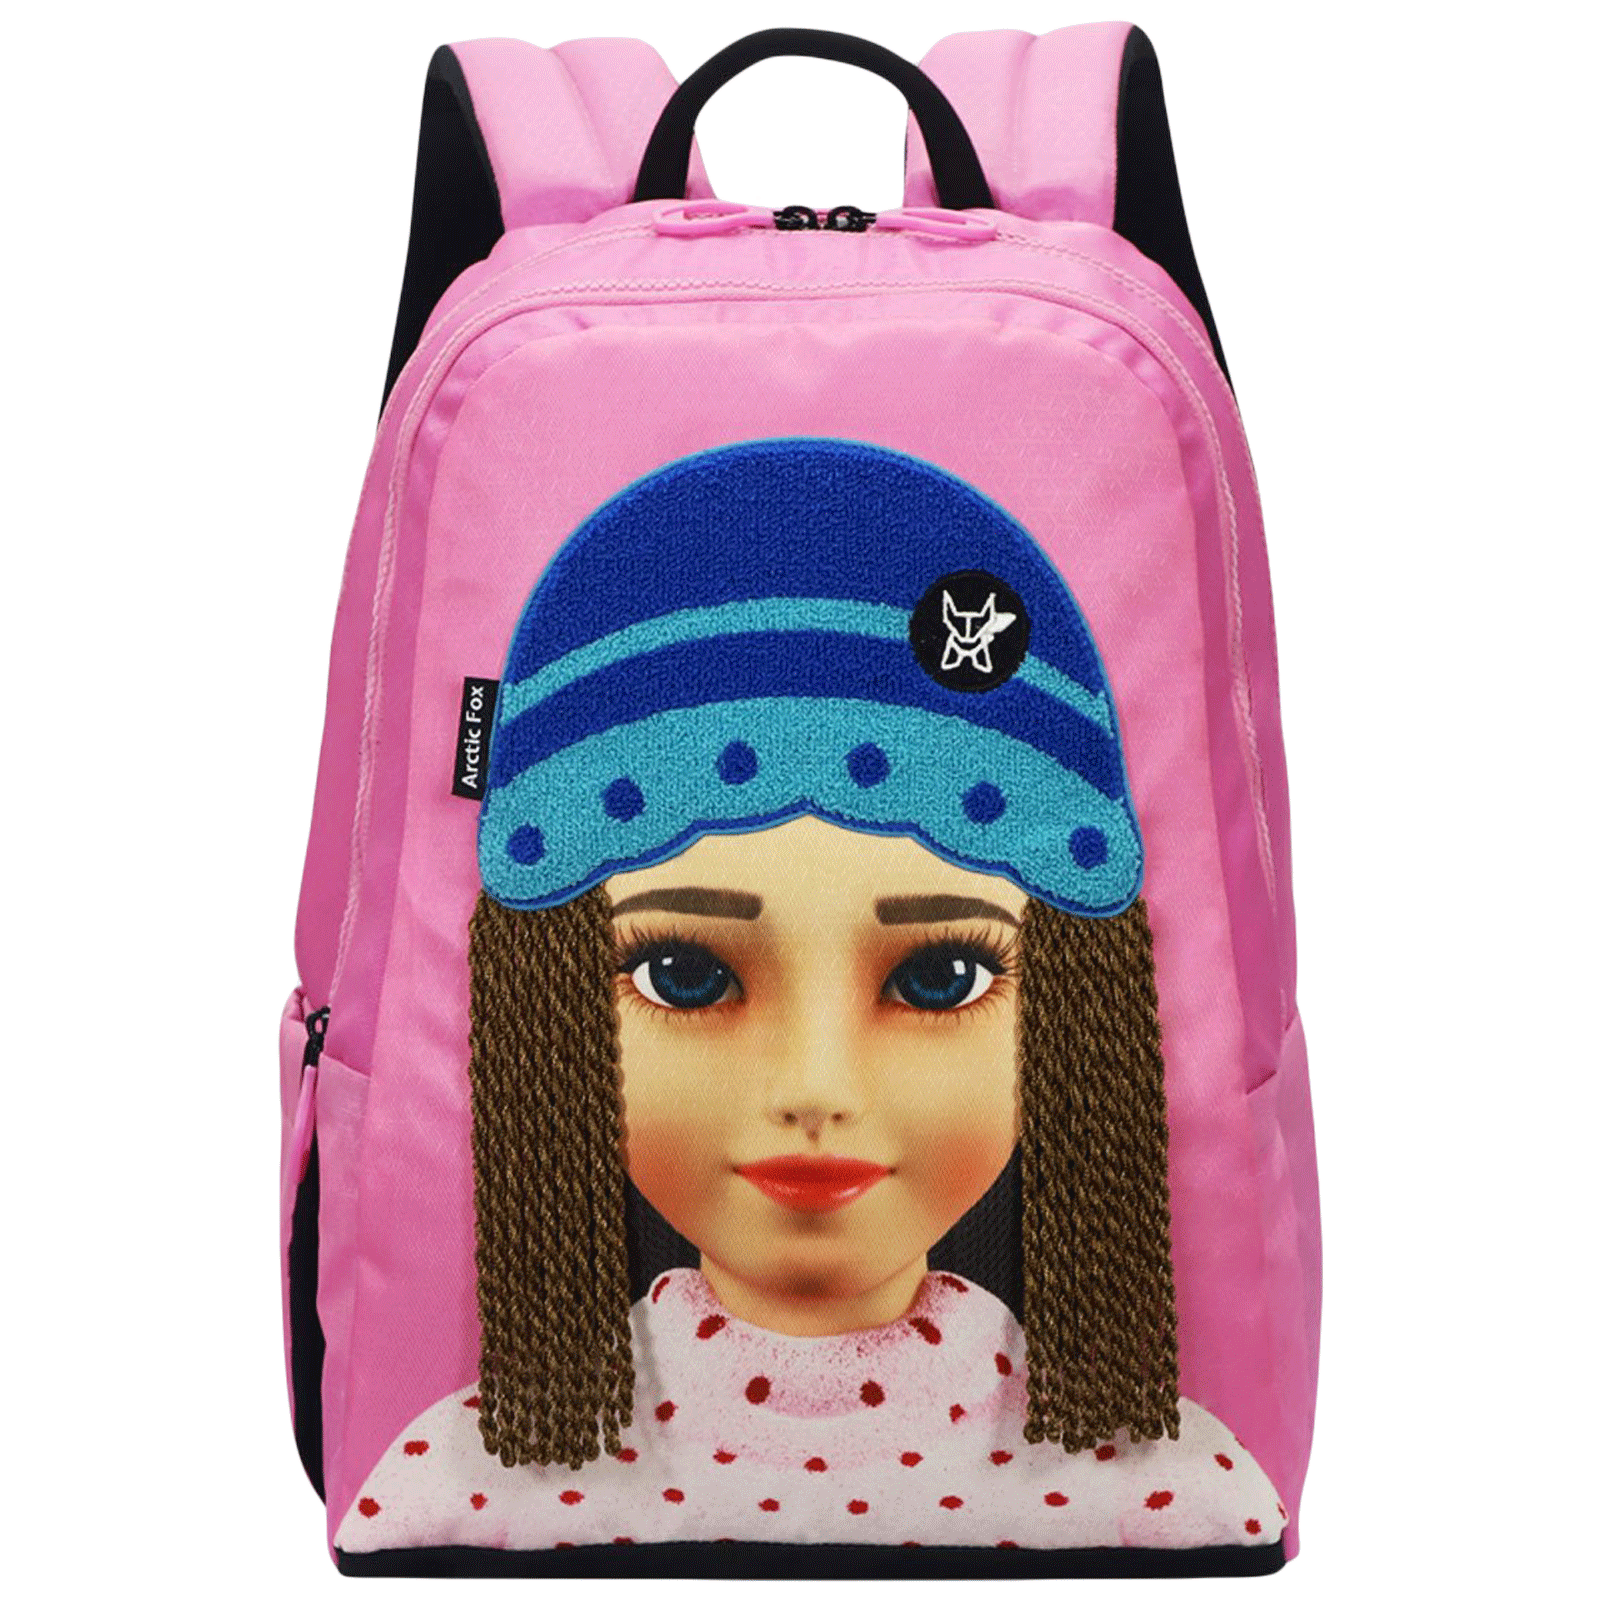 Arctic Fox Sophia 20 Litres PU Coated Polyester Backpack (2 Spacious Compartments, FJUBPKFUPWZ065020, Fuchsia Pink)